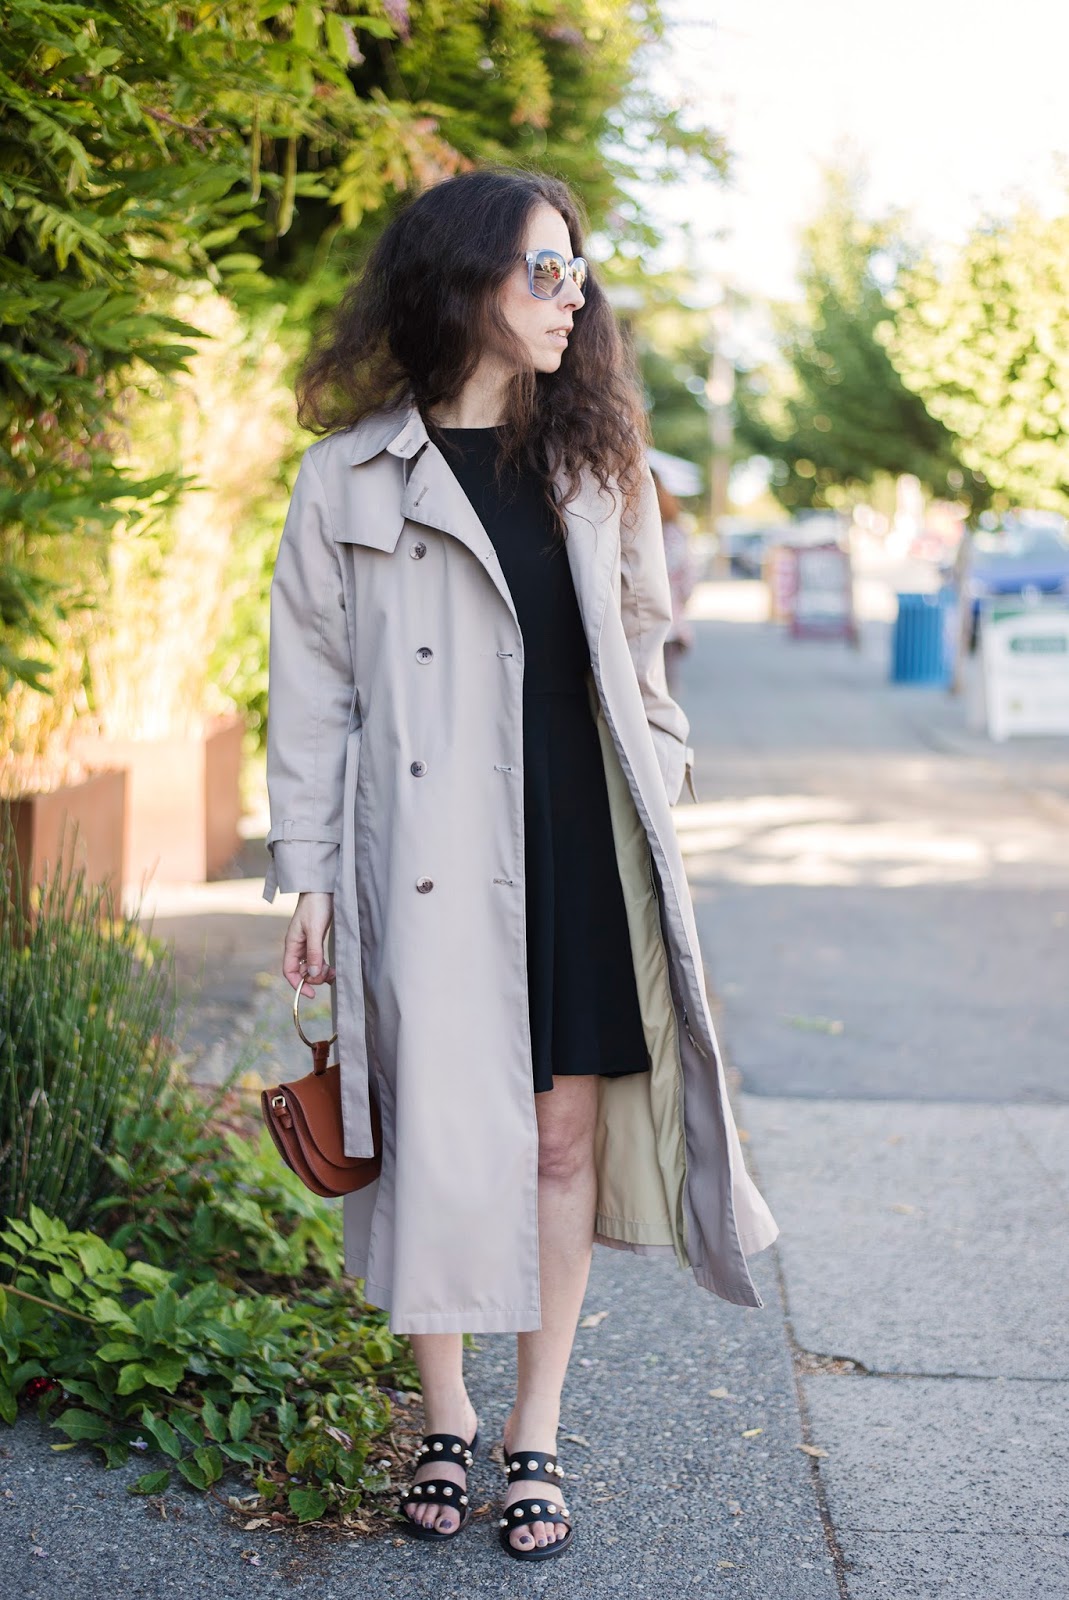 Closet Staple: For the Love of the Trench Coat